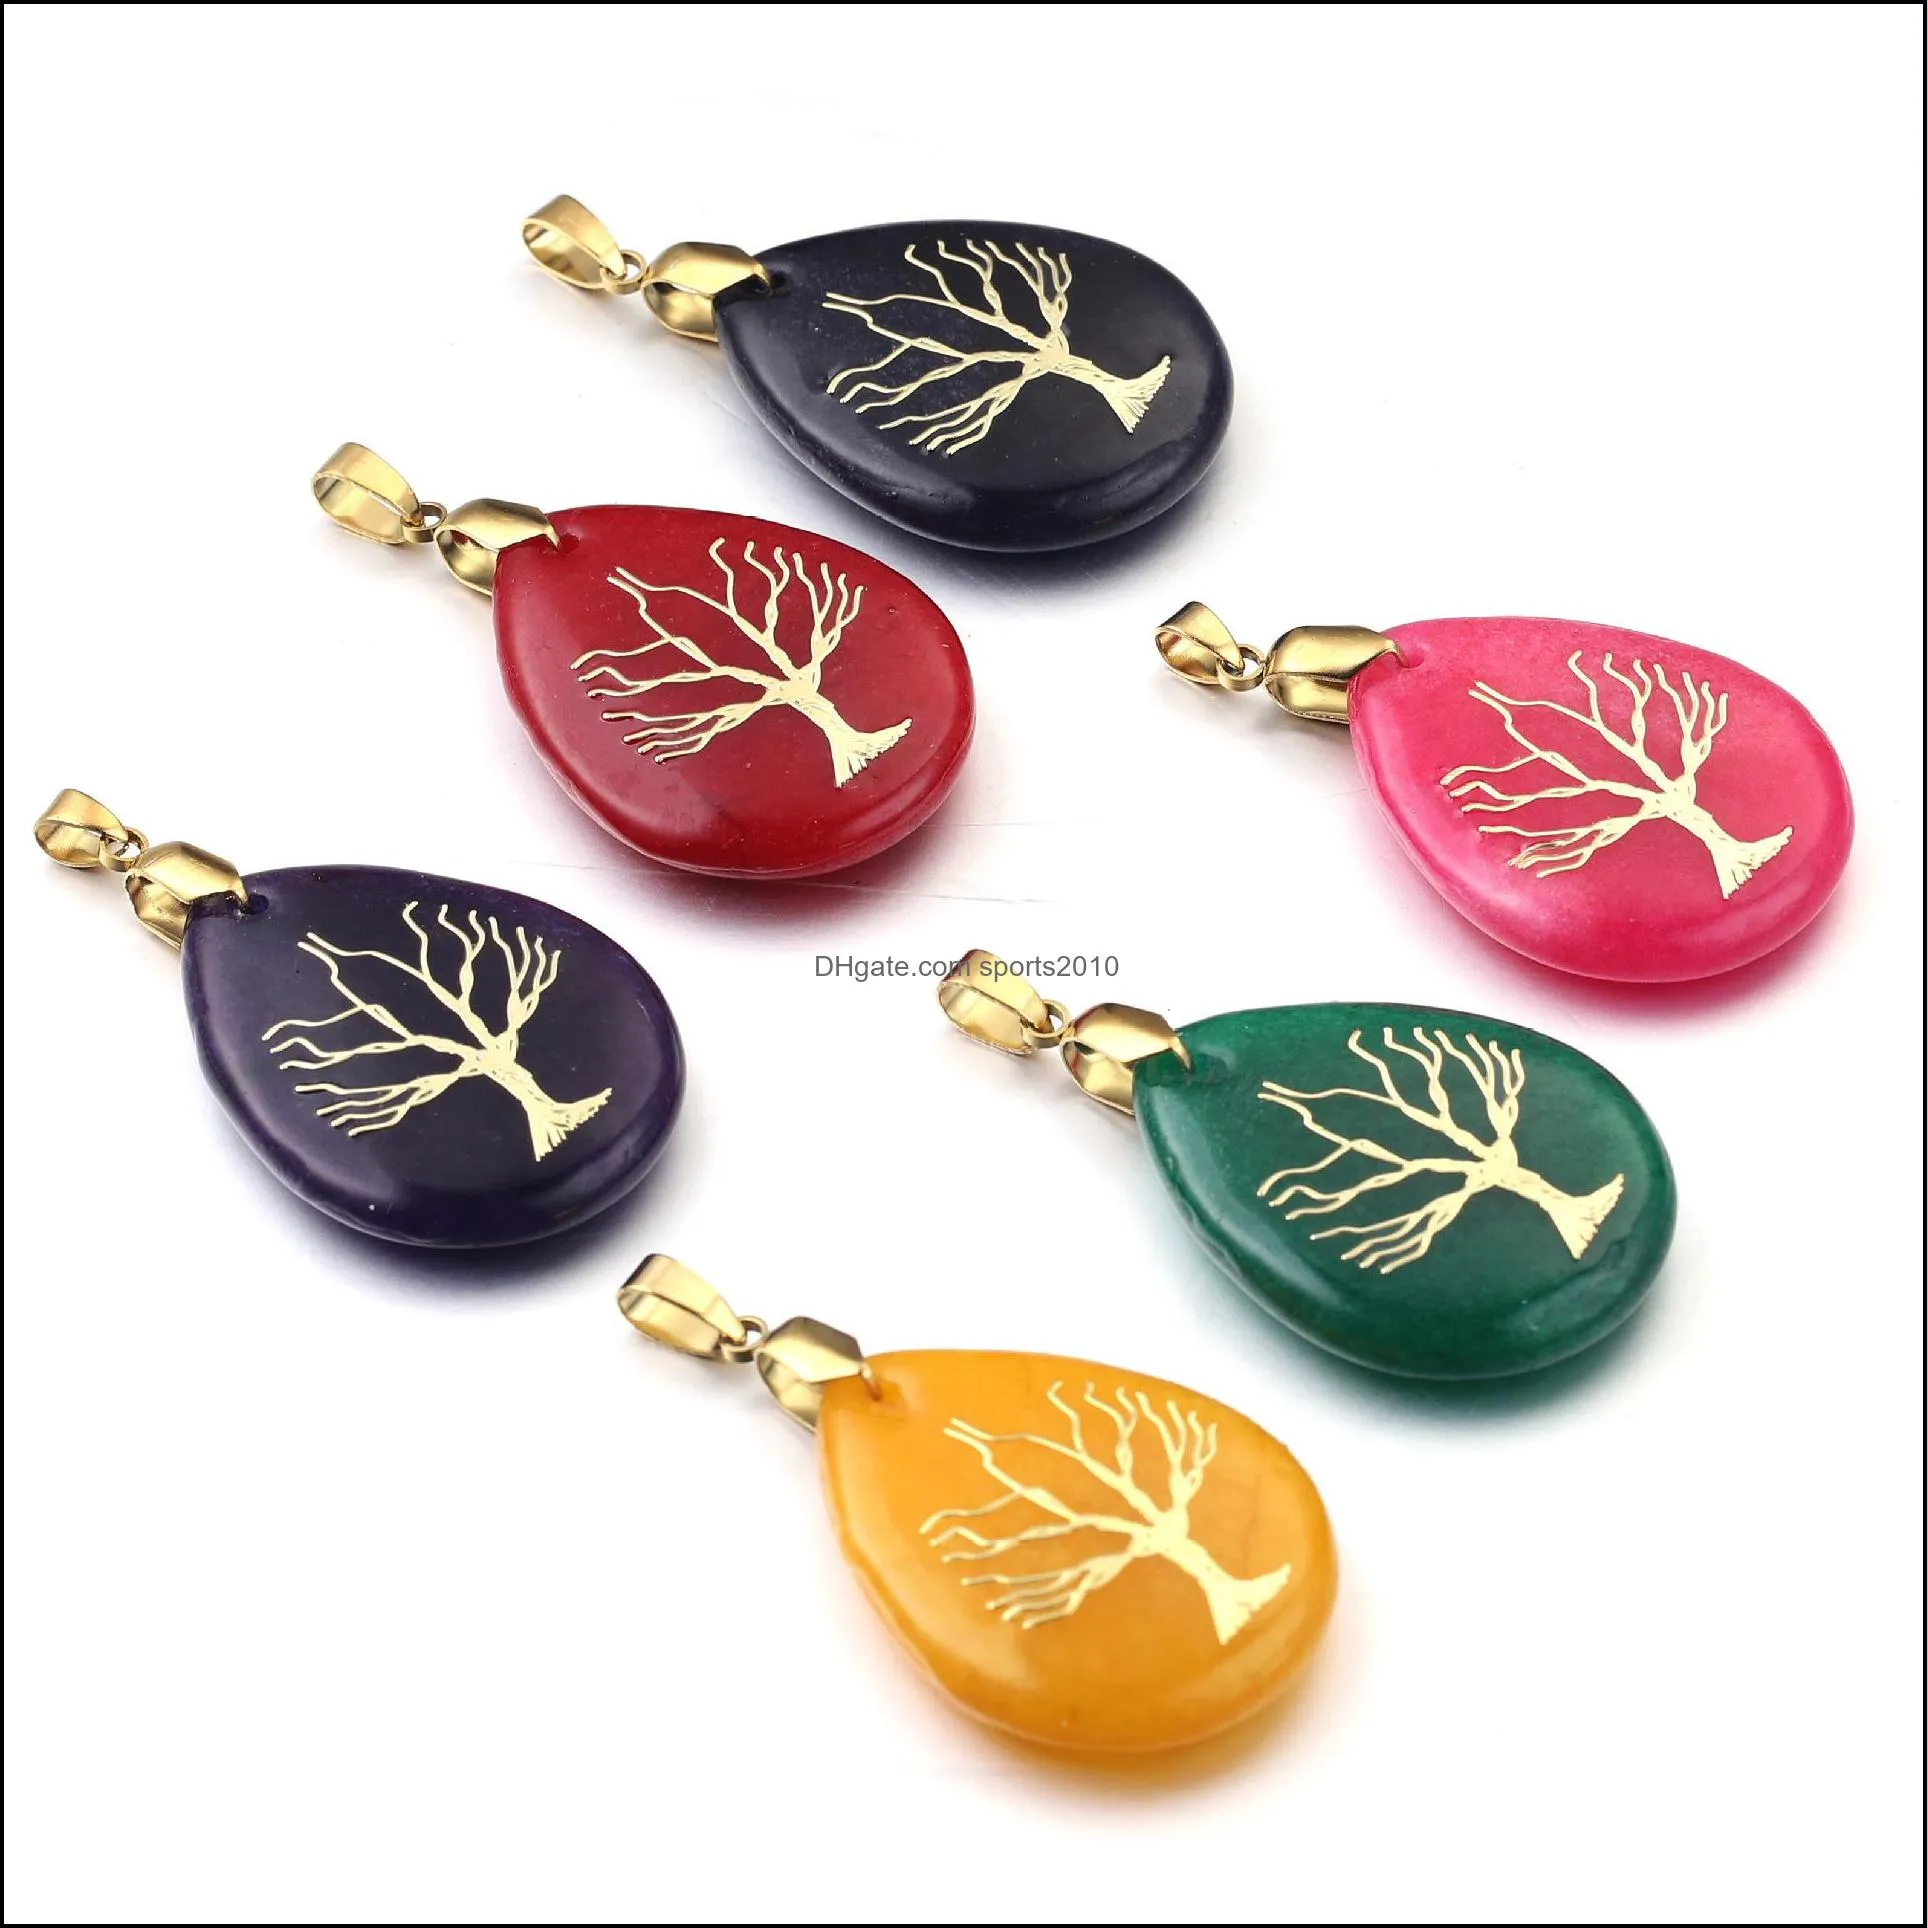 waterdrop stone charms reiki healing tree of life symbol quartz stones pendant for jewelry making necklace sports2010